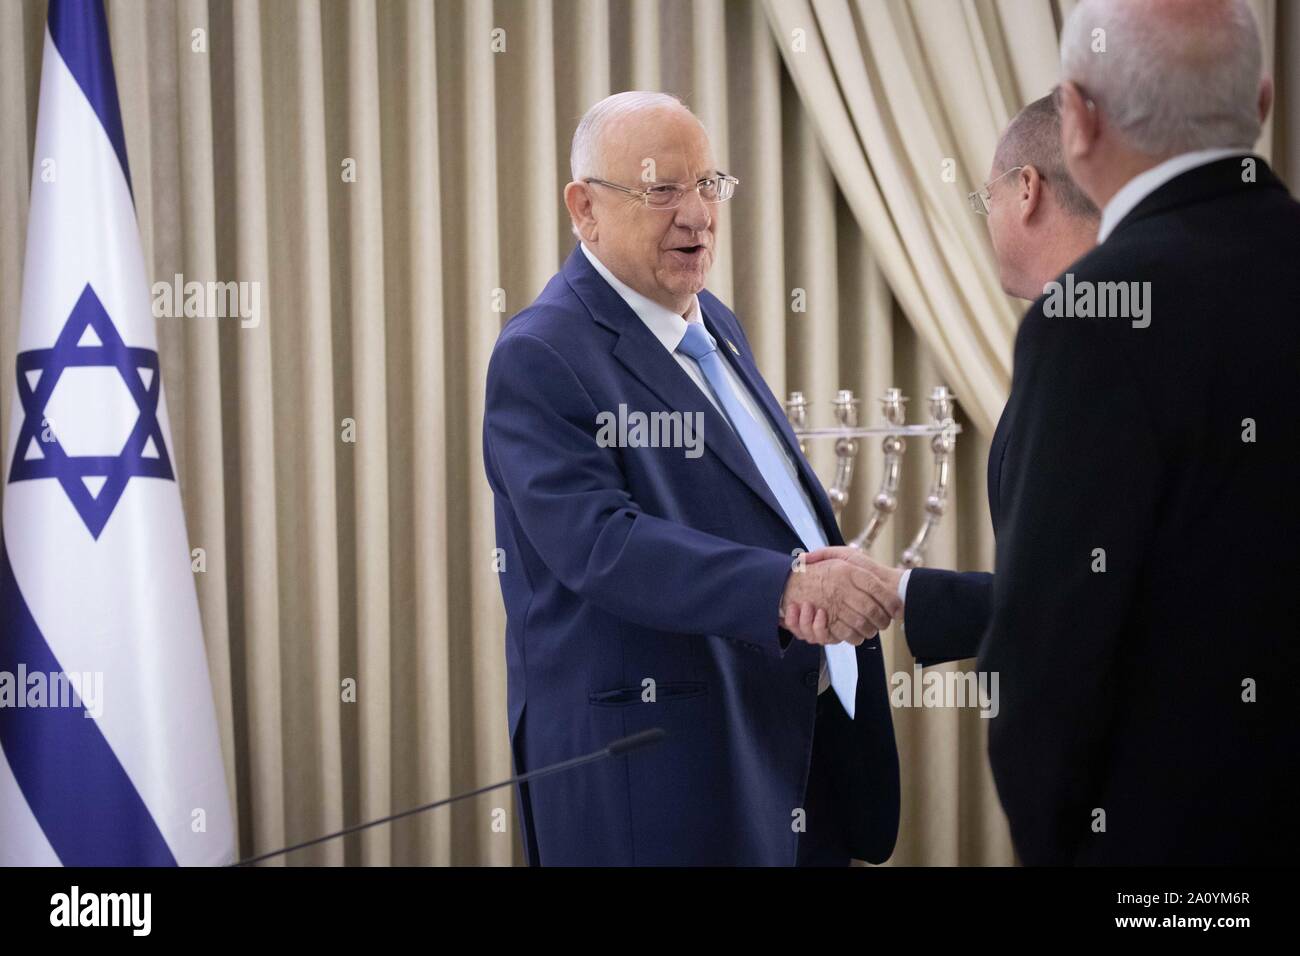 (190922) -- JERUSALEM, Sept. 22, 2019 (Xinhua) -- Israeli President Reuven Rivlin (L) meets with members of the Yisrael Beiteinu party at the President's Residence in Jerusalem, on Sept. 22, 2019. Israeli President Reuven Rivlin began on Sunday consultations with all elected parties before he decides the person who will be tasked with forming Israel's next government amid post-election political stalemate. (Yonatan Sindel/JINI via Xinhua) Stock Photo